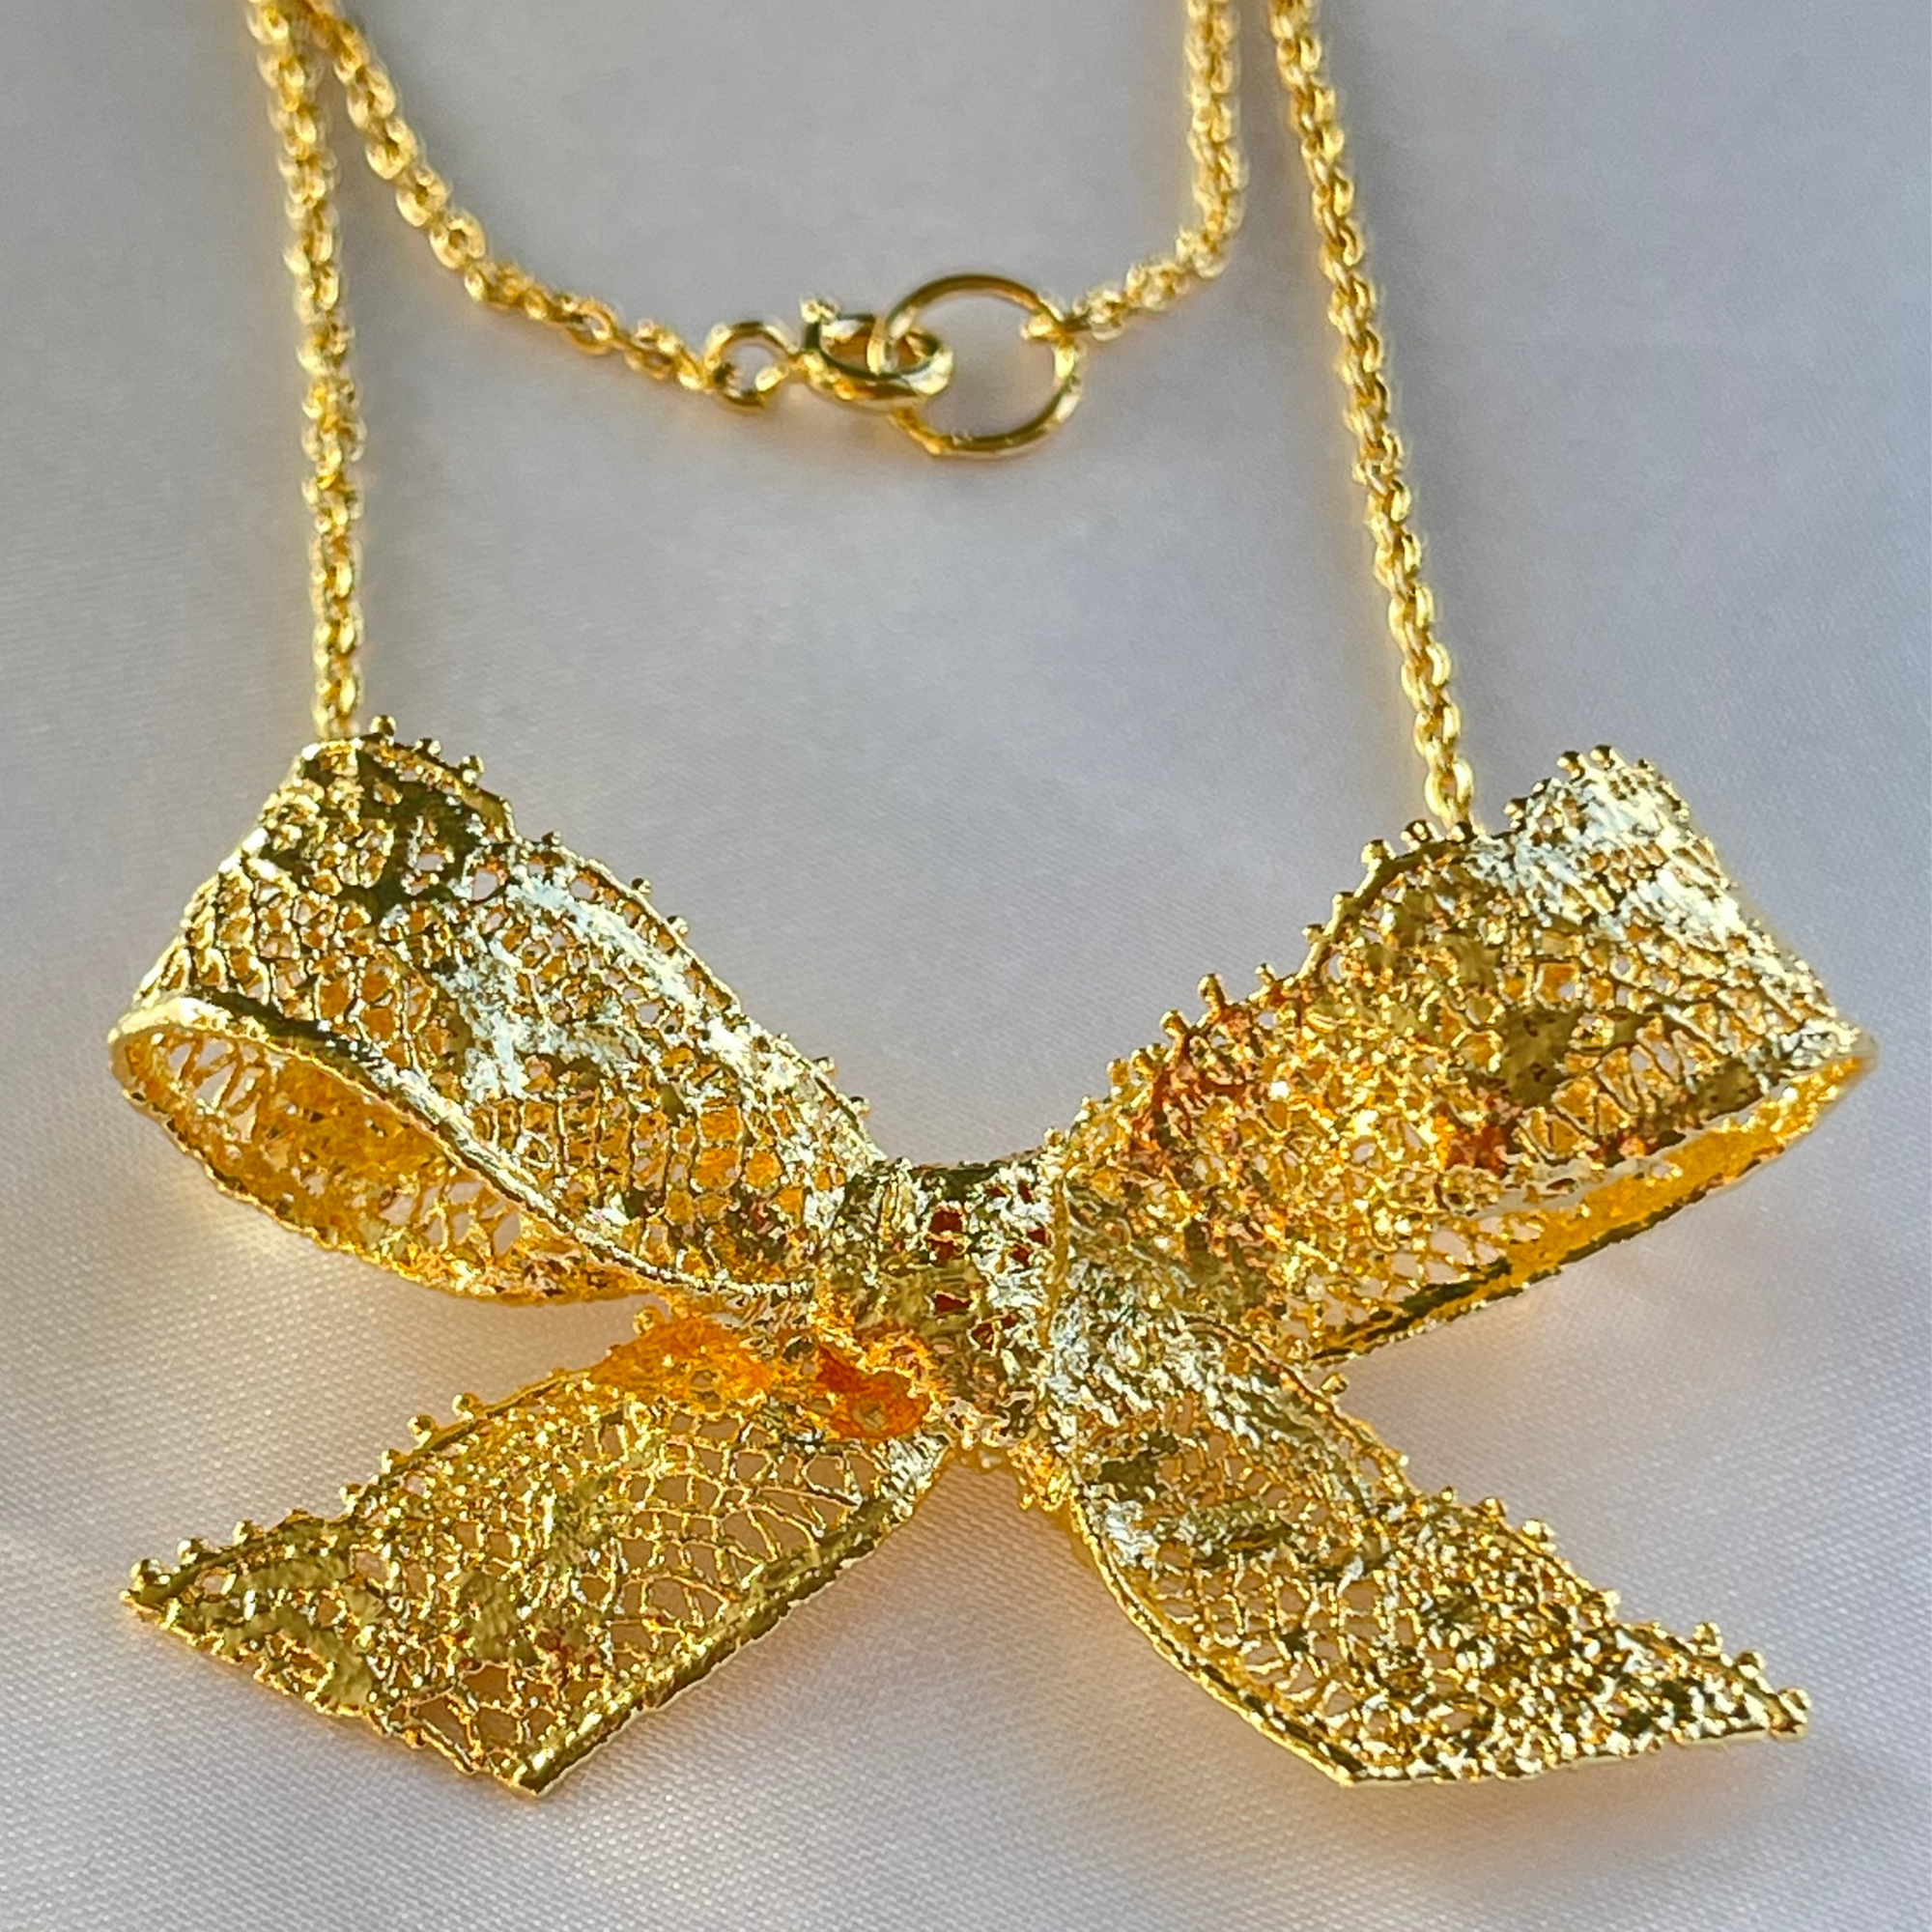 Micheline Lace Bow Necklace in 24k gold.